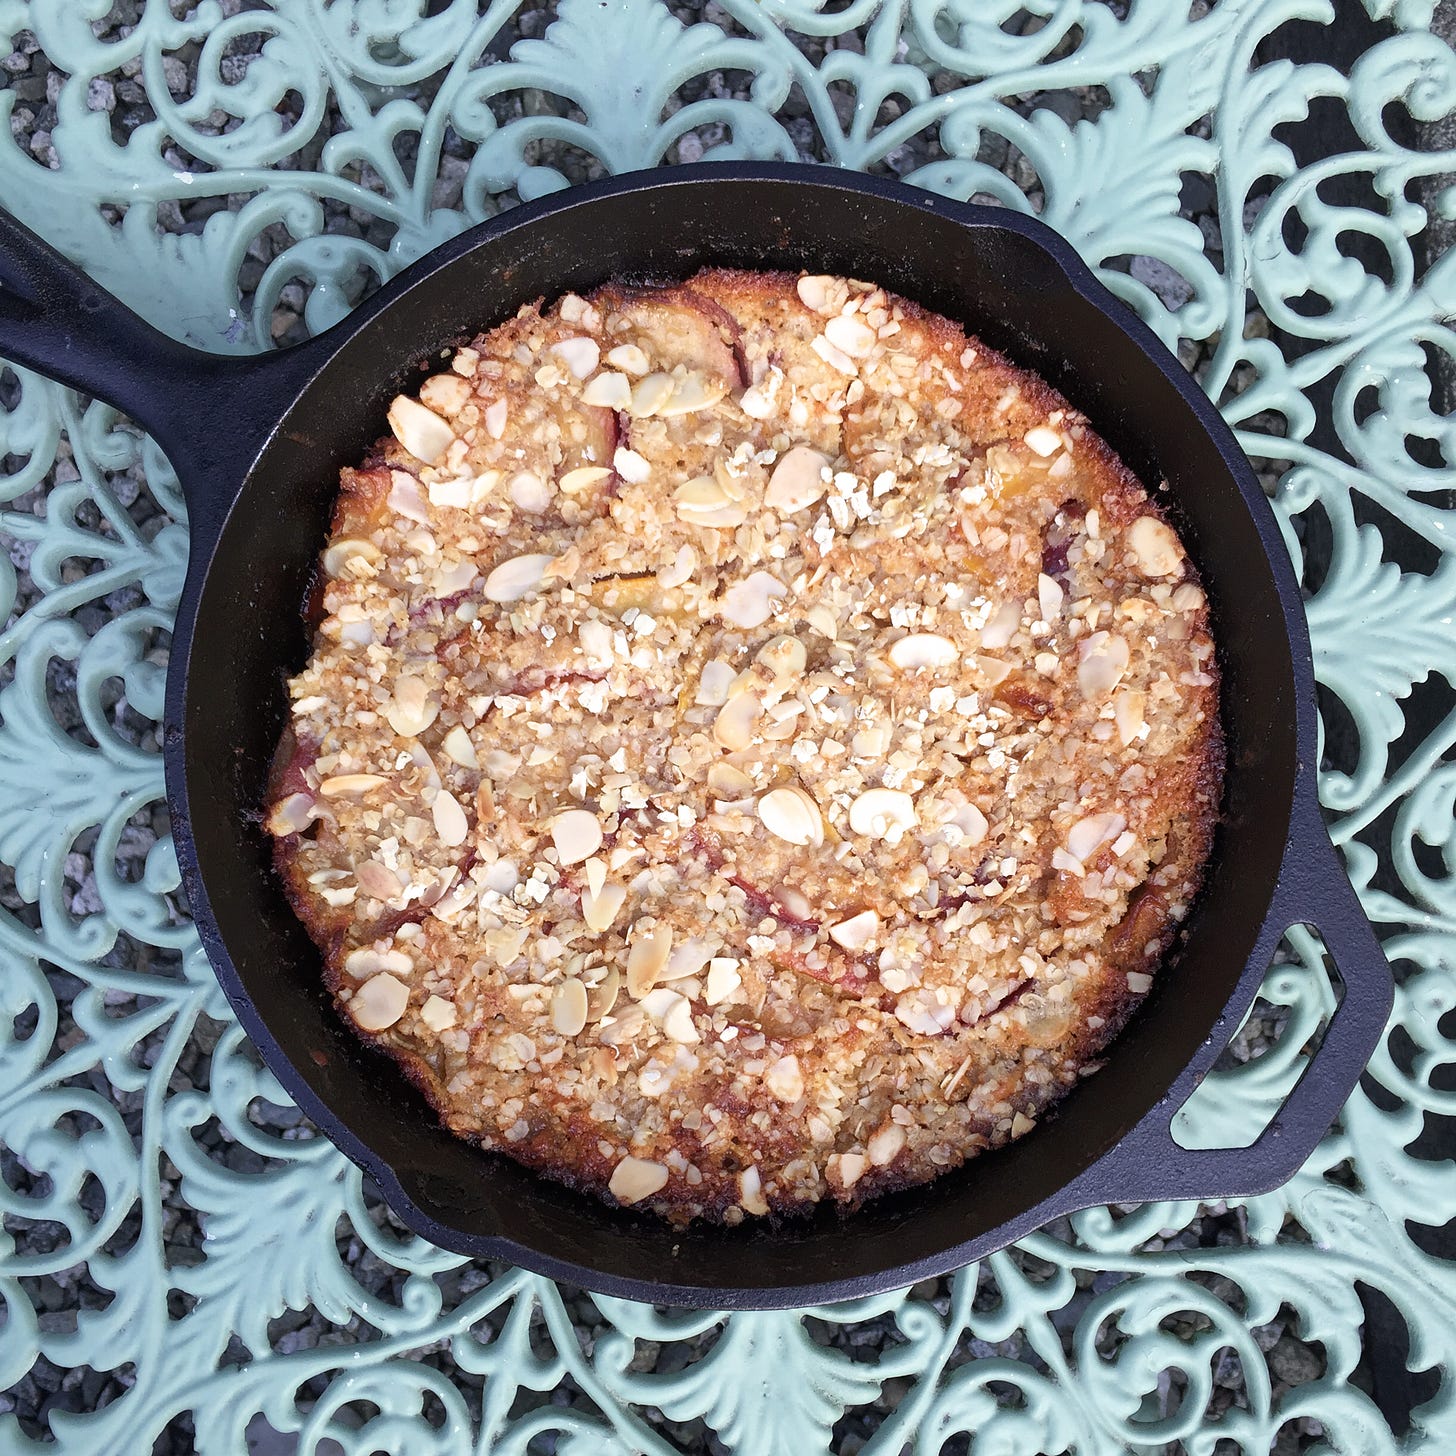 from above, a cast iron pan of peach cobbler topped with almonds and oats sits on a mint green wrought-iron table.